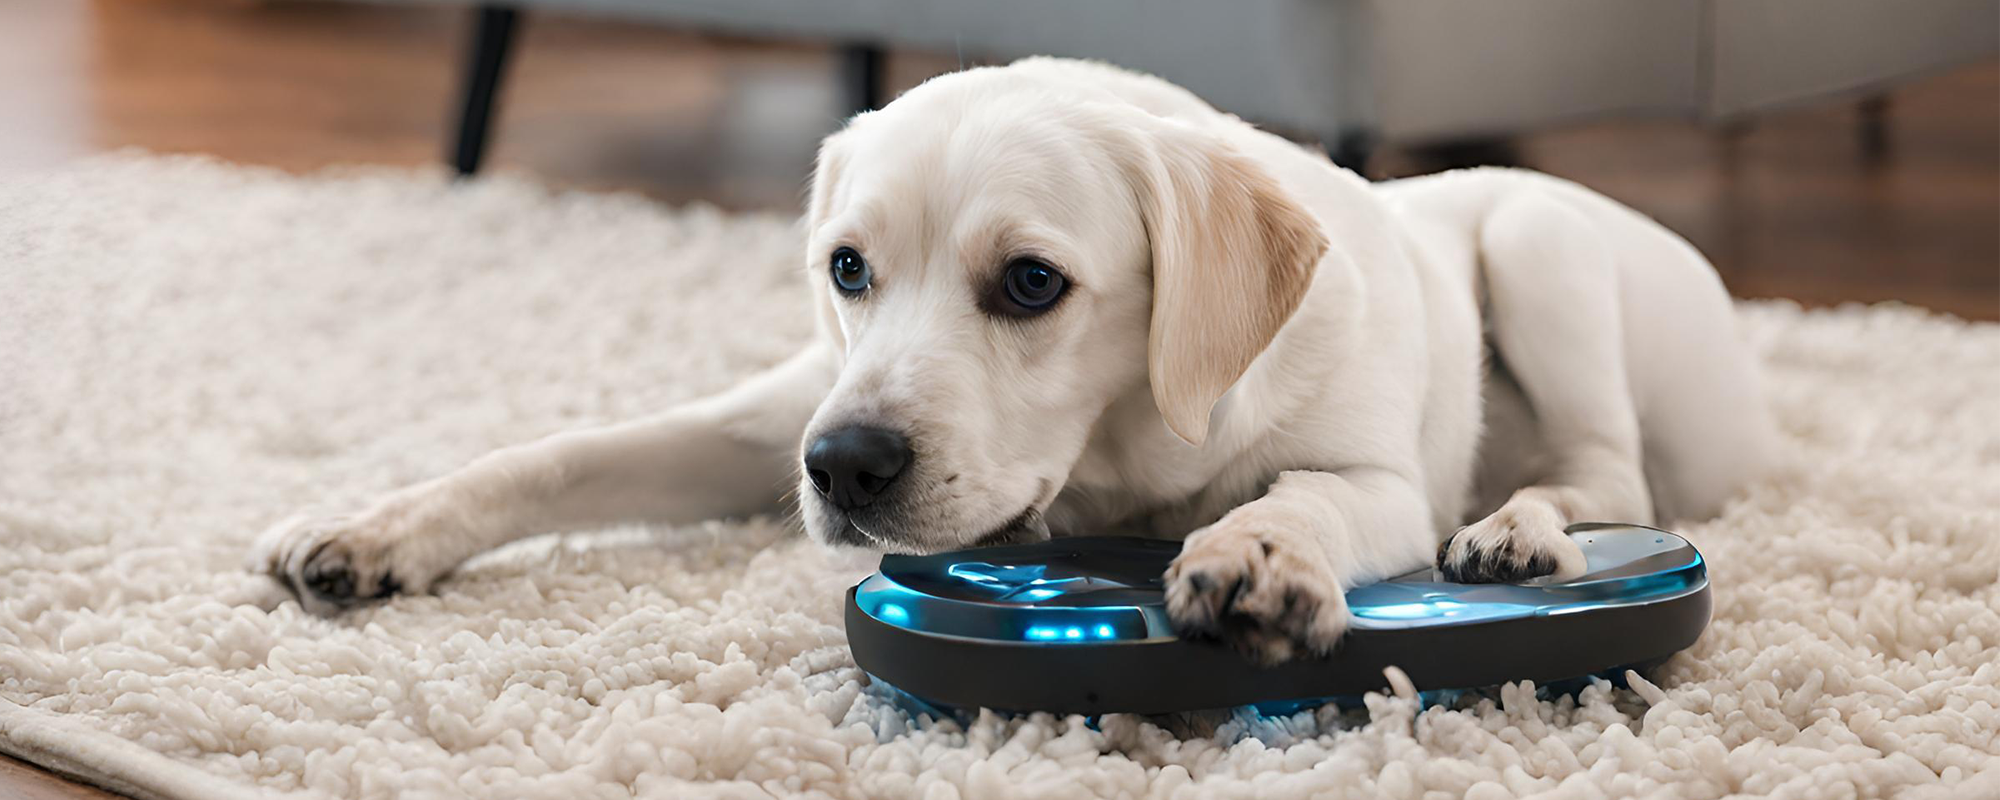 The Smart Dog Collar - An IoT Innovation for Pets